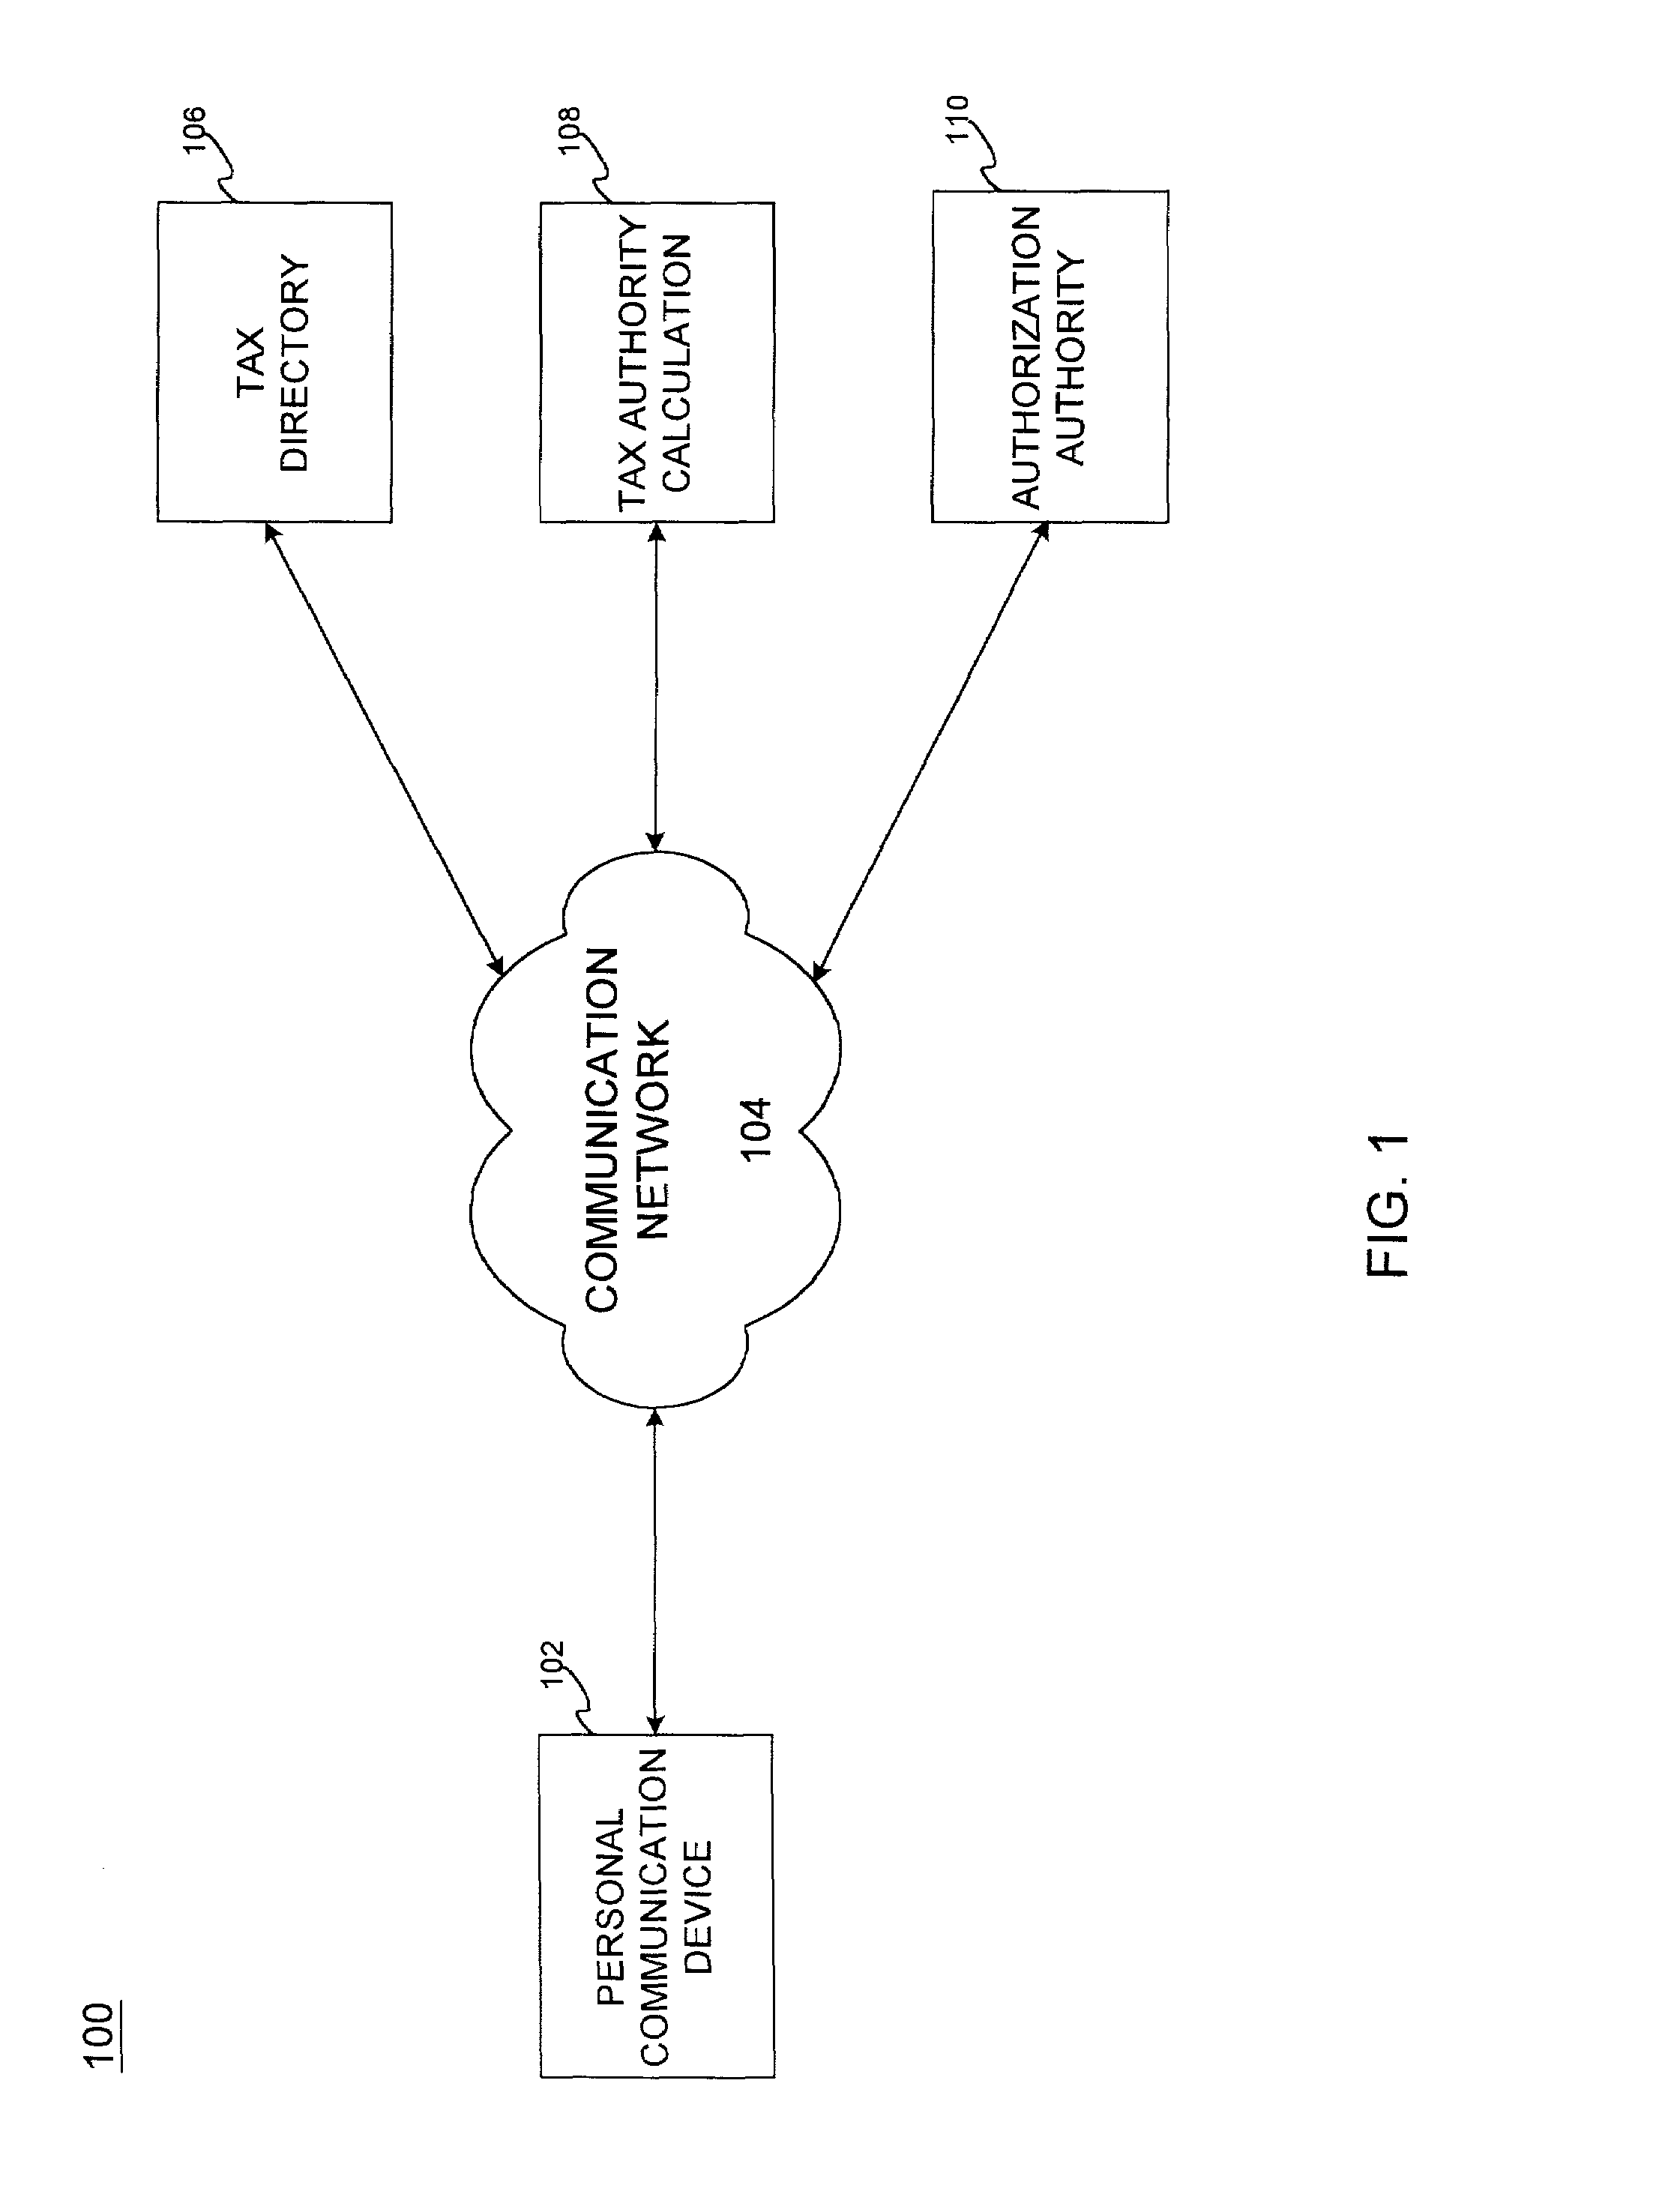 Transaction tax settlement in personal communication devices